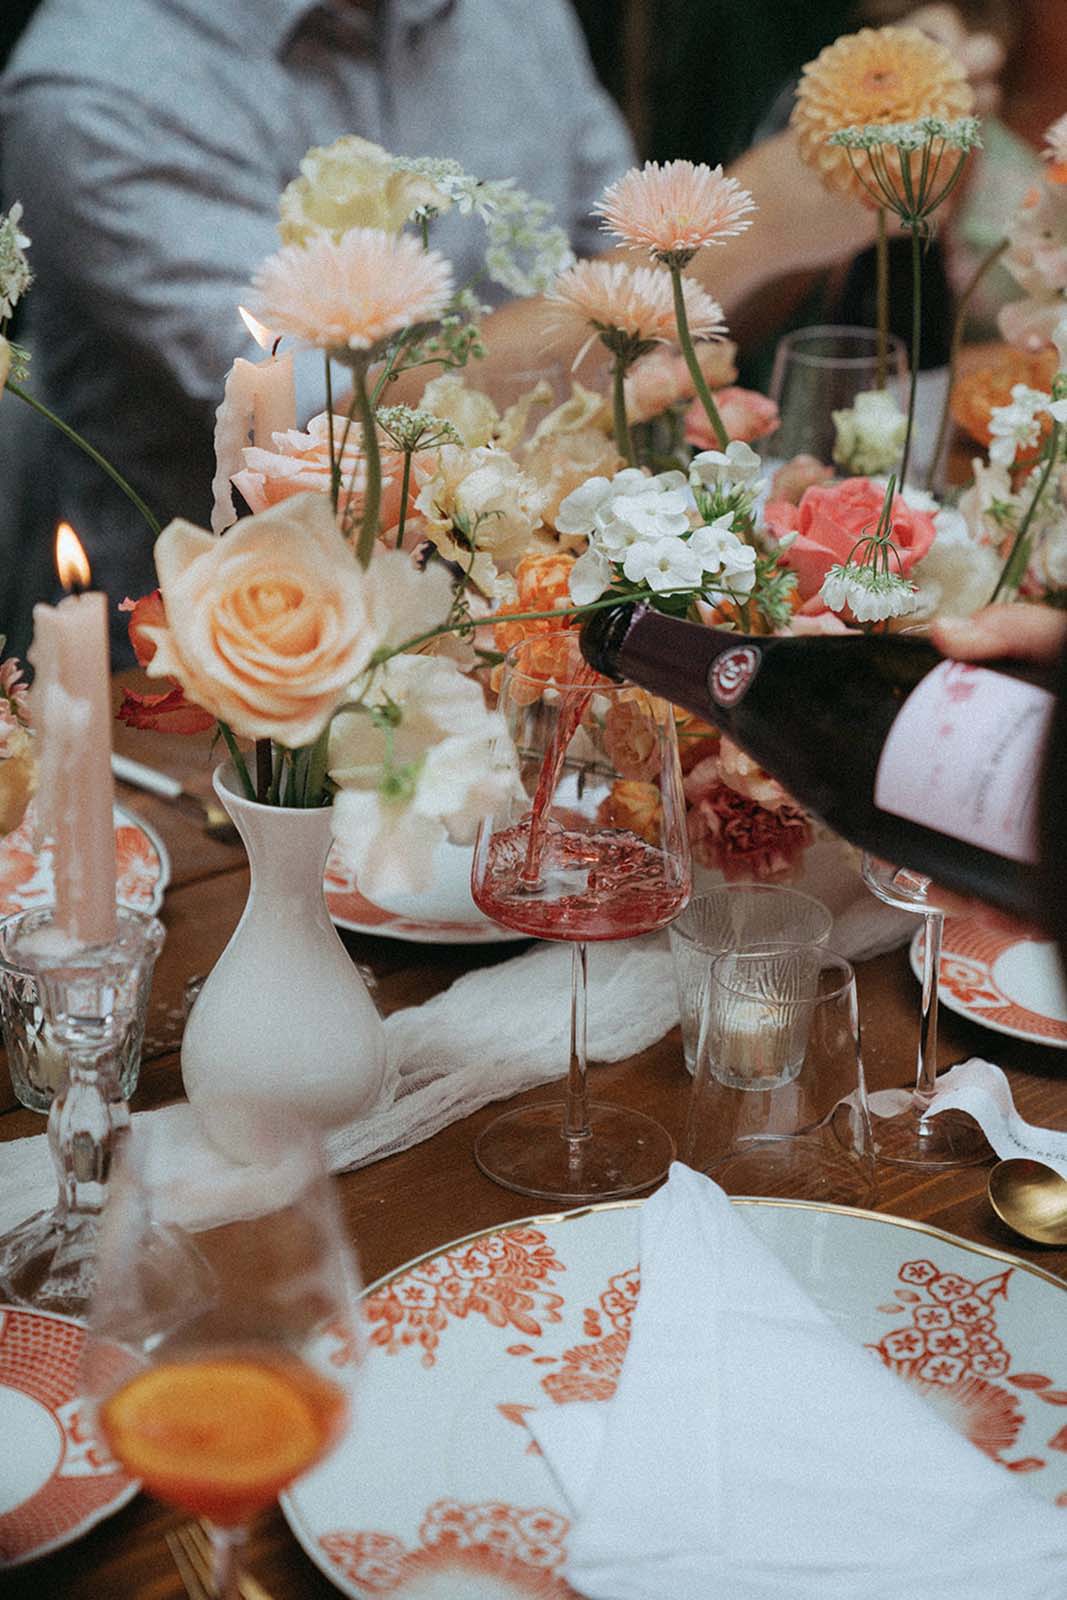 Intricate Details: A Close-Up of the Exquisite Wedding Table Decoration